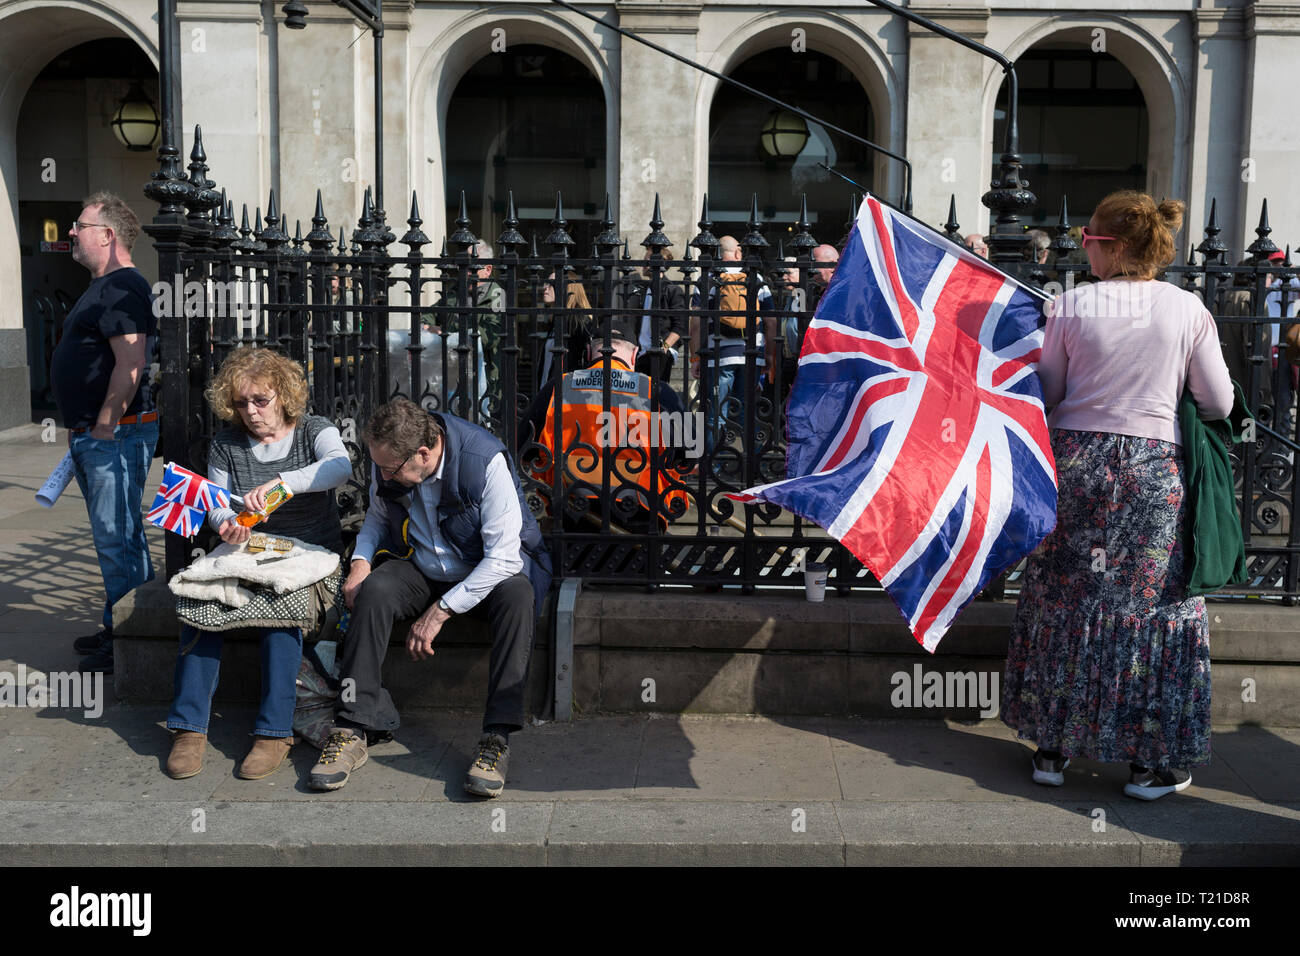 London, UK. 29th Mar, 2019. On the day that the UK was originally scheduled to leave the EU Prime Minister Theresa May also suffered her third vote defeat (for the EU withdrawal agreement), bringing a No Deal Brexit ever closer and Leave Brexiteers protest outside parliament in Westminster, in London, England. Photo by Richard Baker/Alamy Live News. Stock Photo